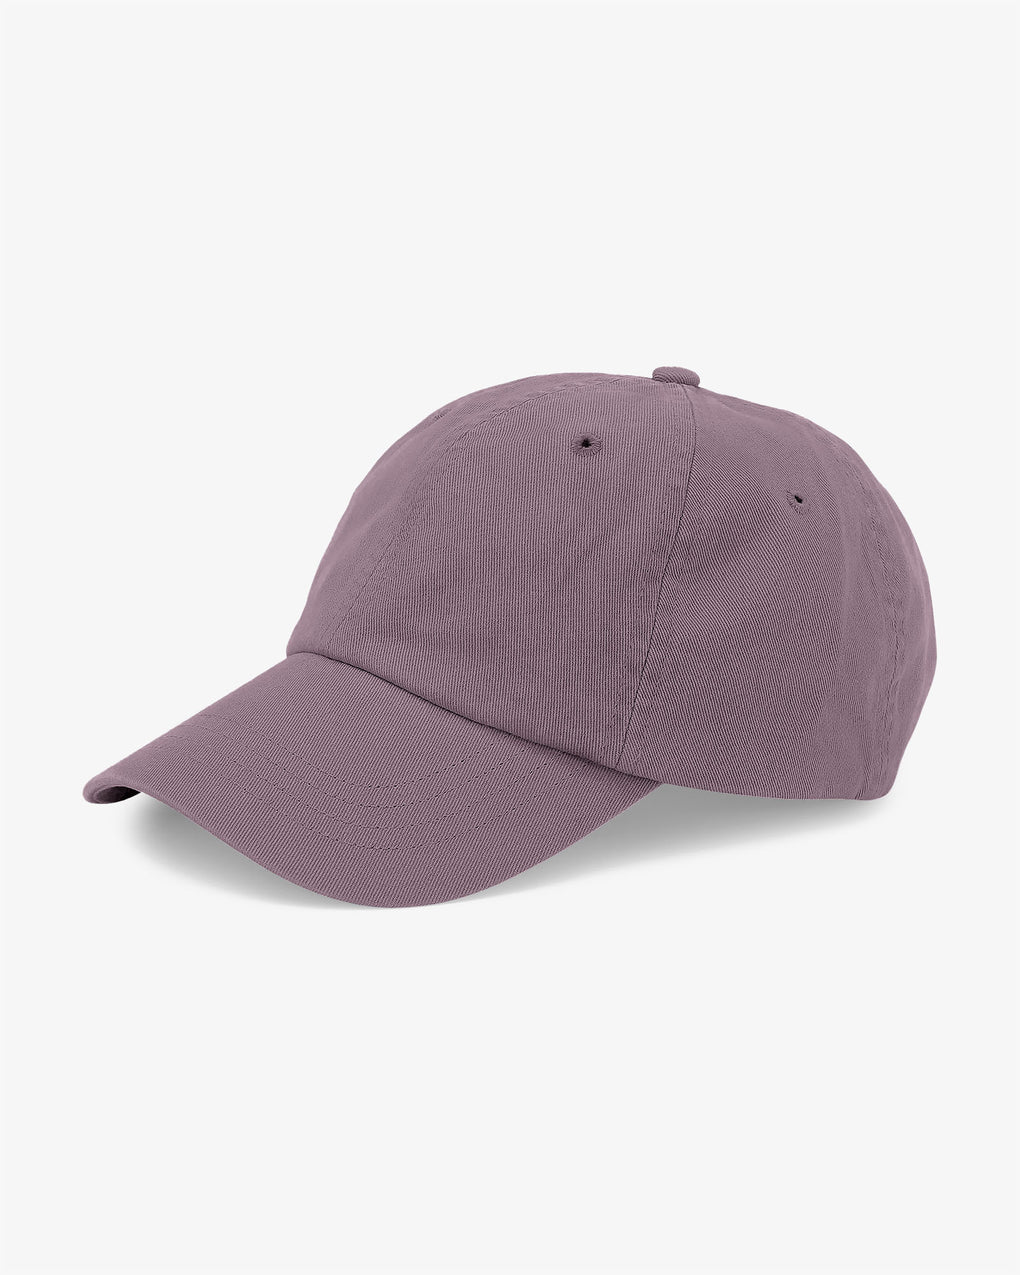 A plain purple Colorful Standard Organic Cotton Cap isolated on a white background.